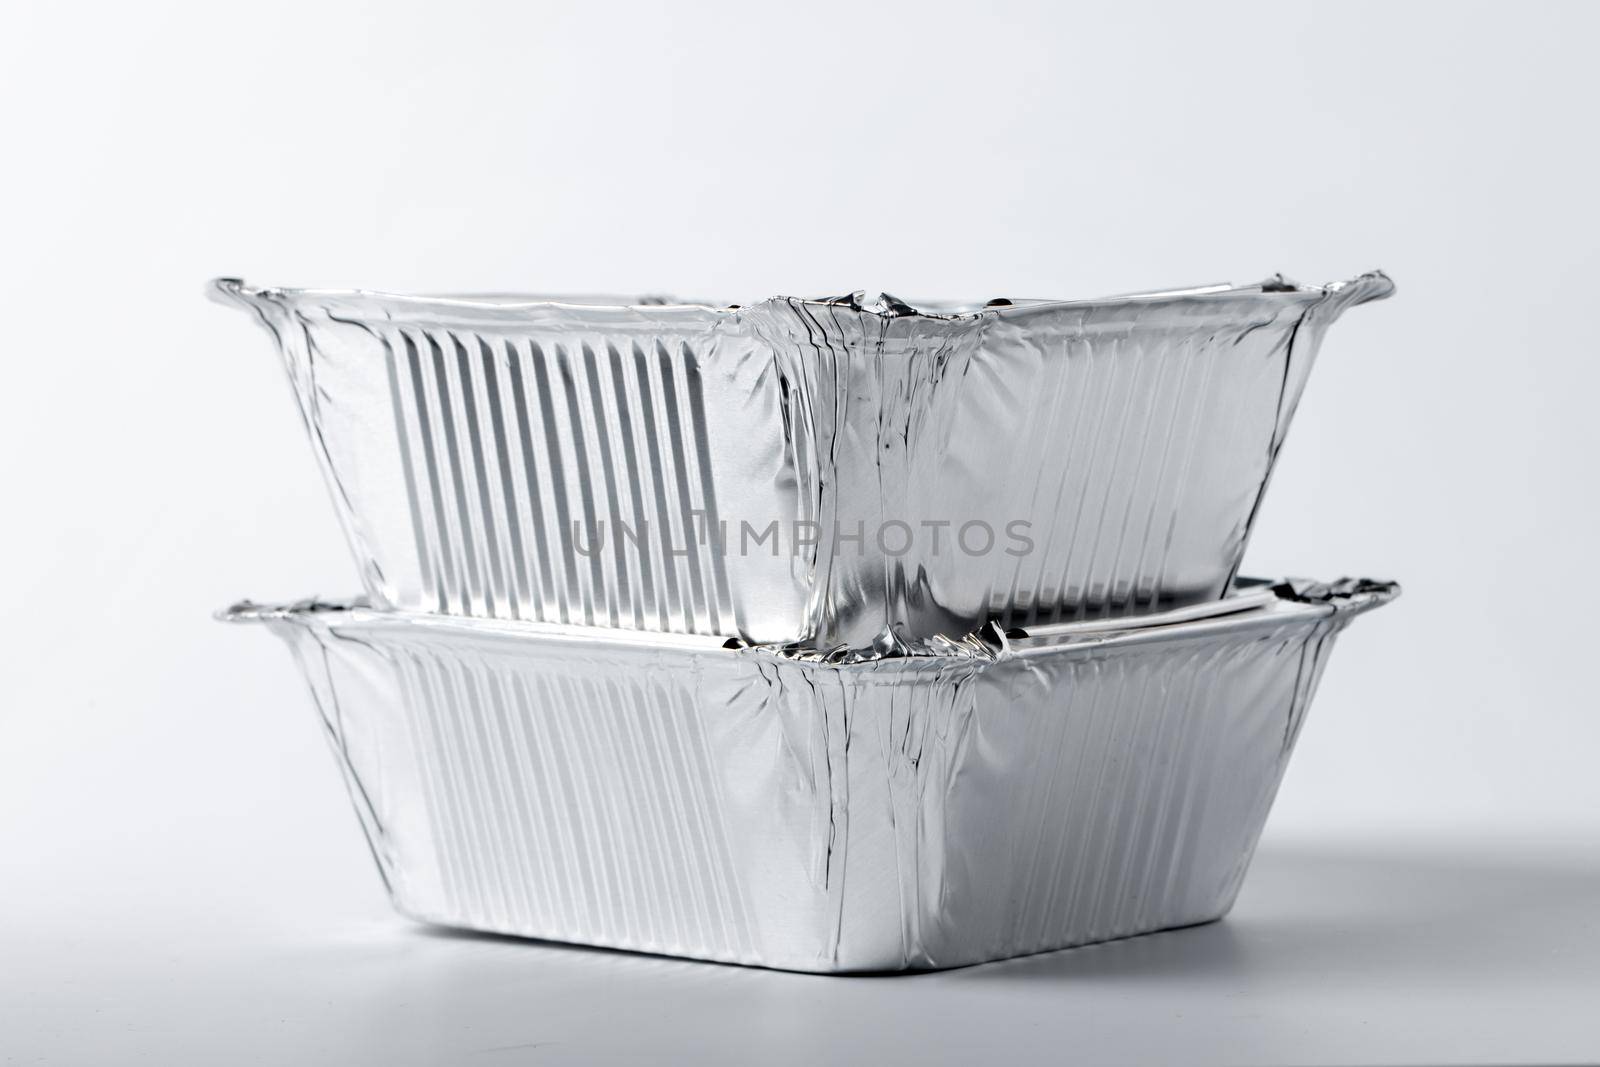 Foil food box with takeaway meal on white background by Fabrikasimf